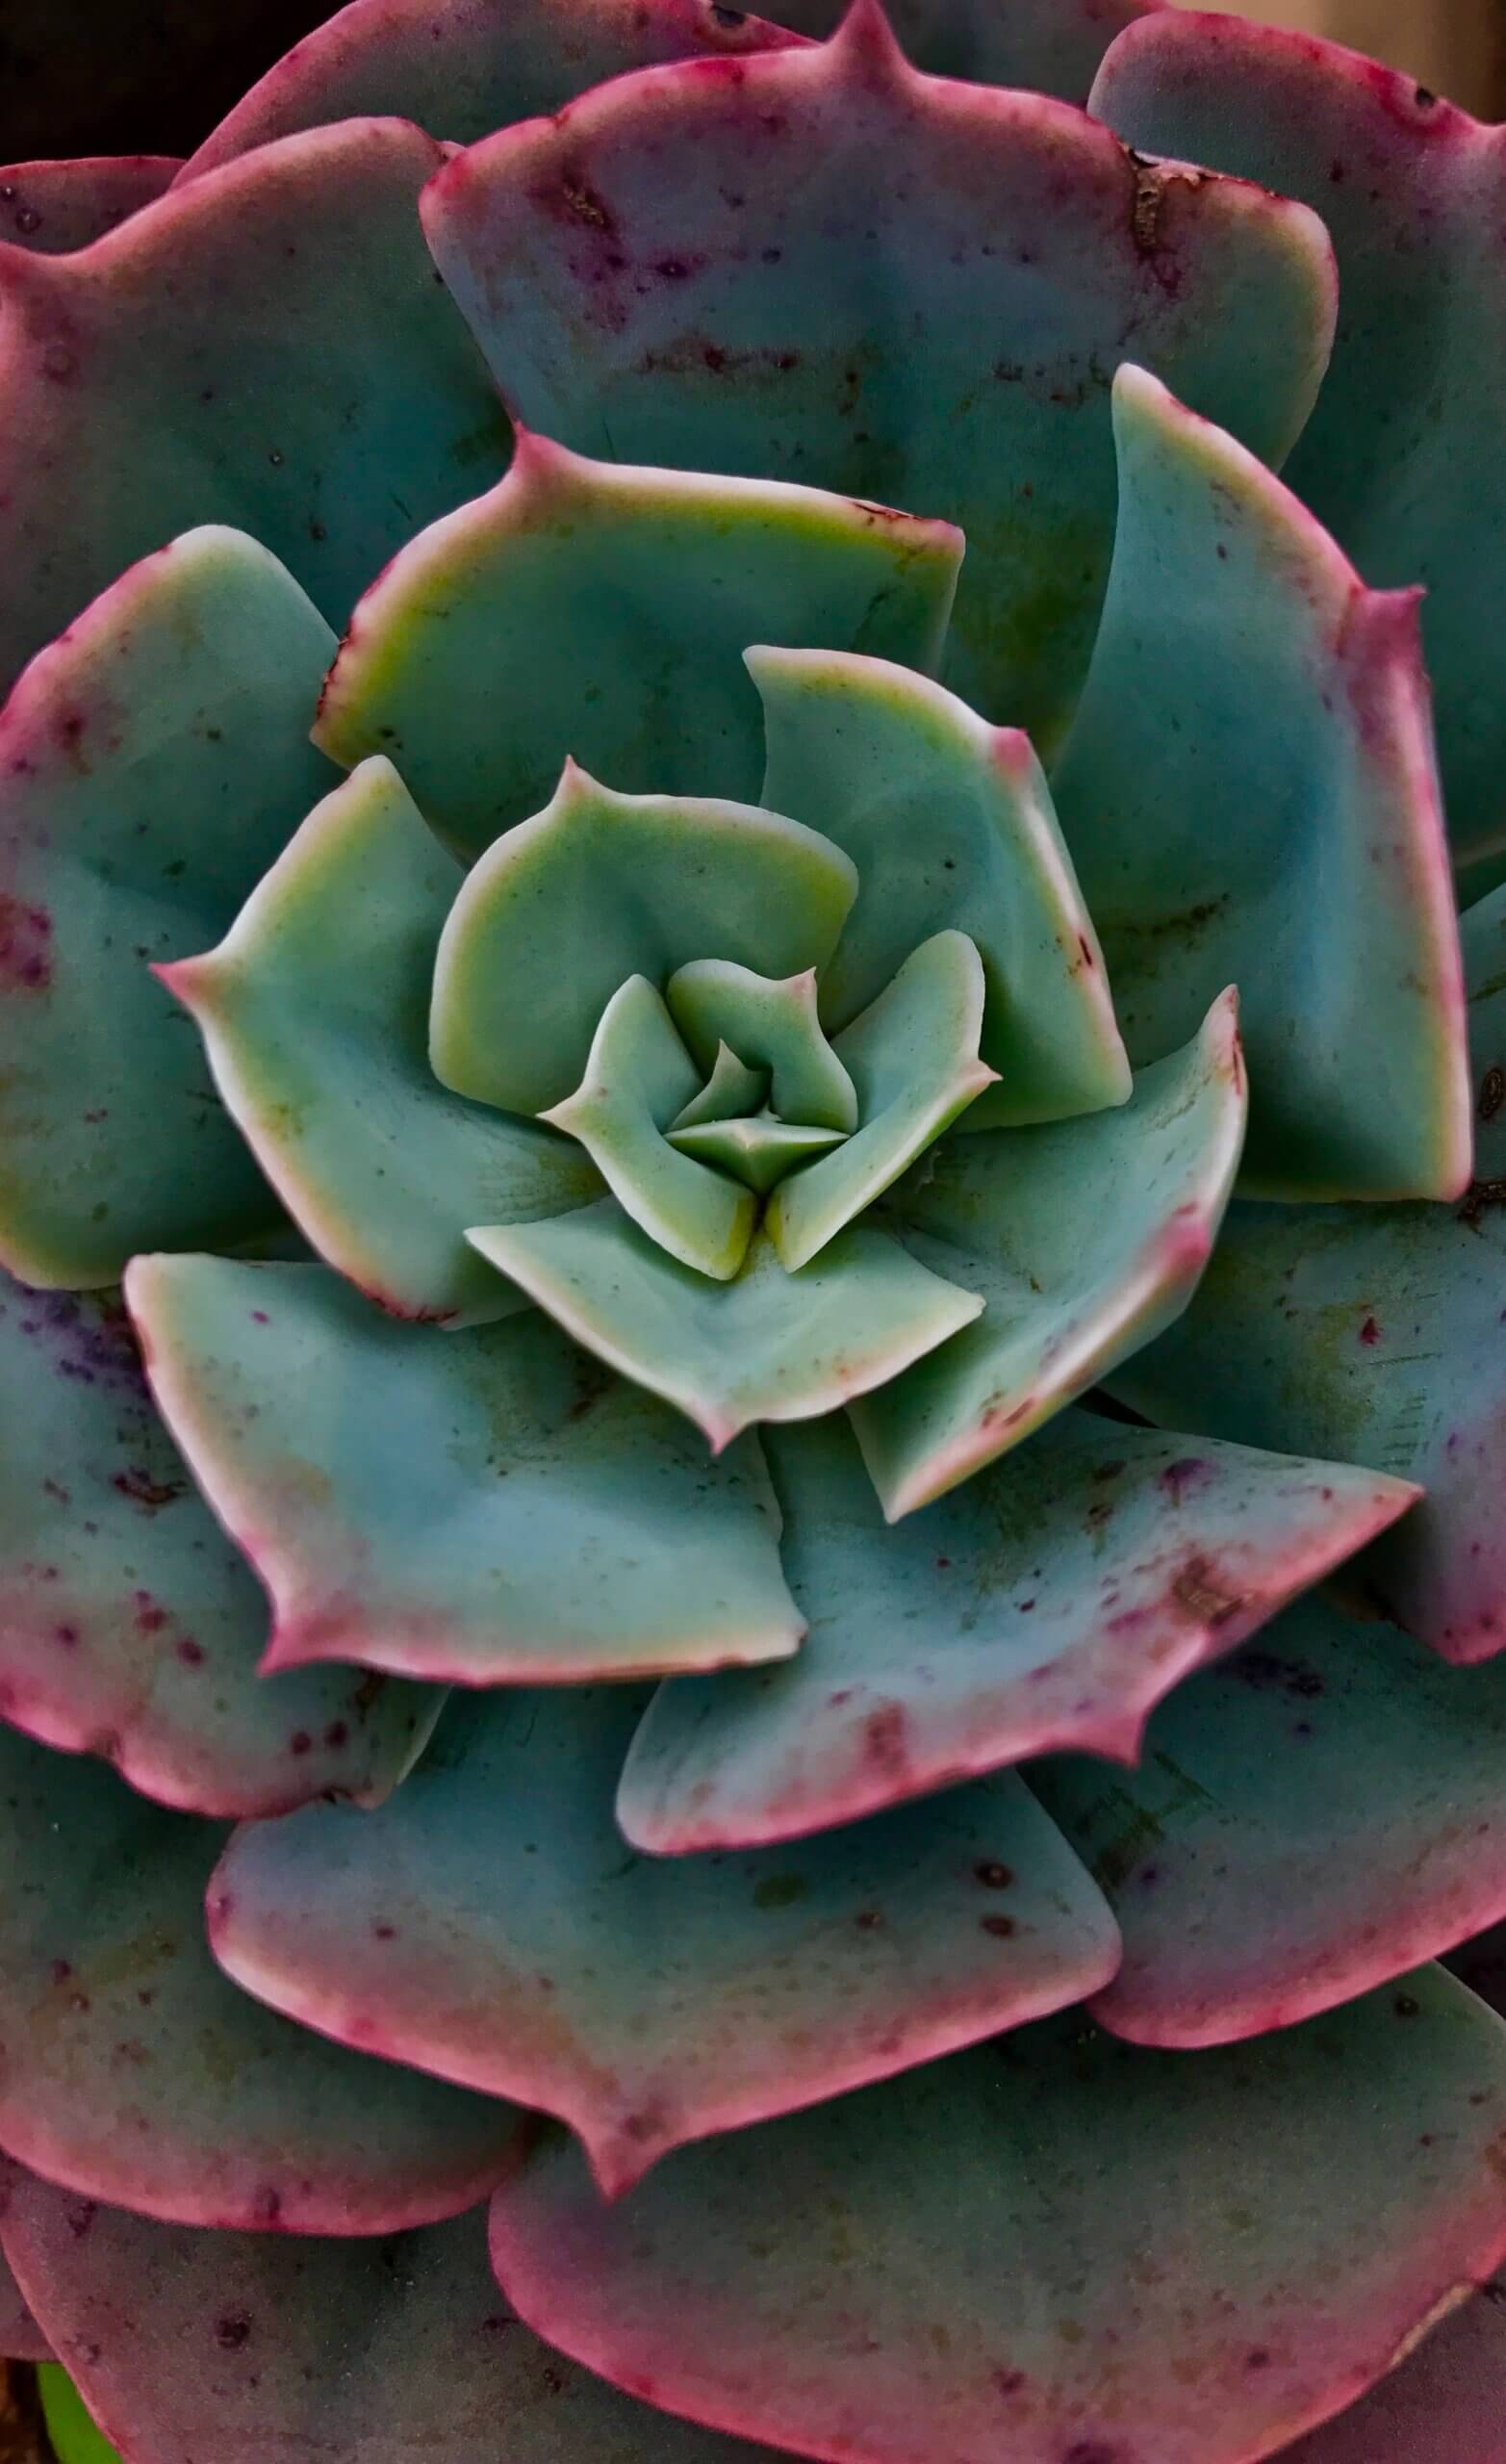 close up view of leaves of Echeveria succulent plant